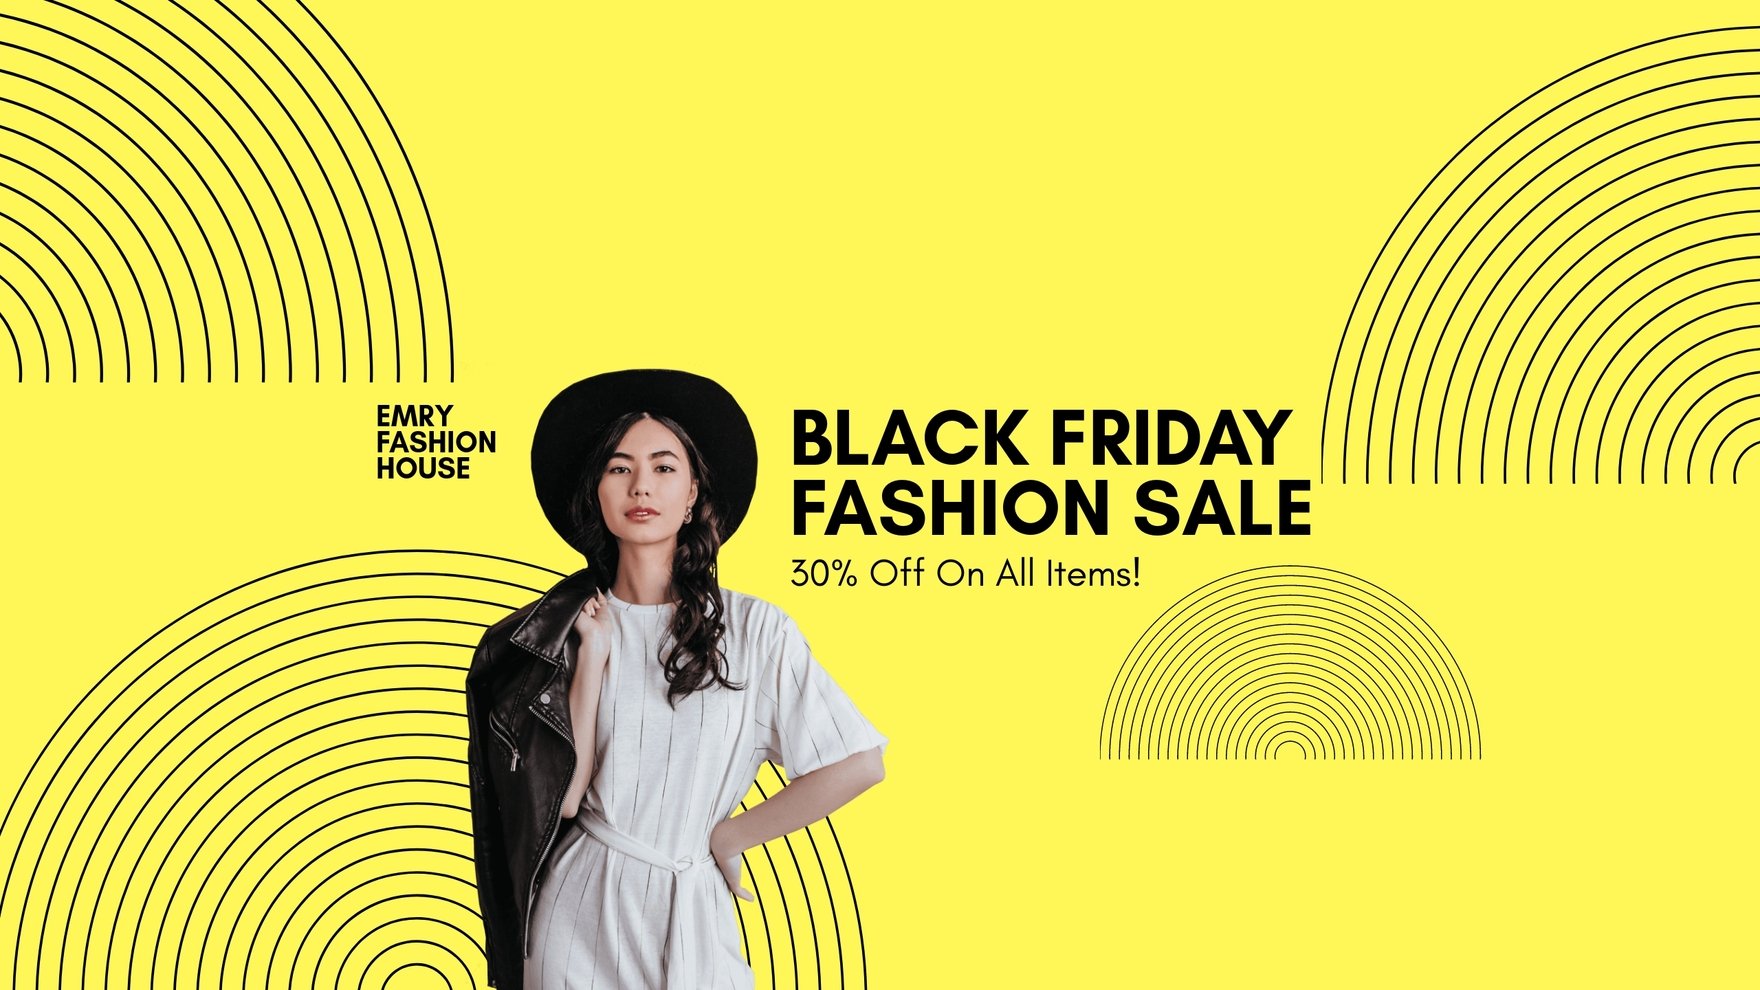 Black Friday Fashion Sale YouTube Banner Template